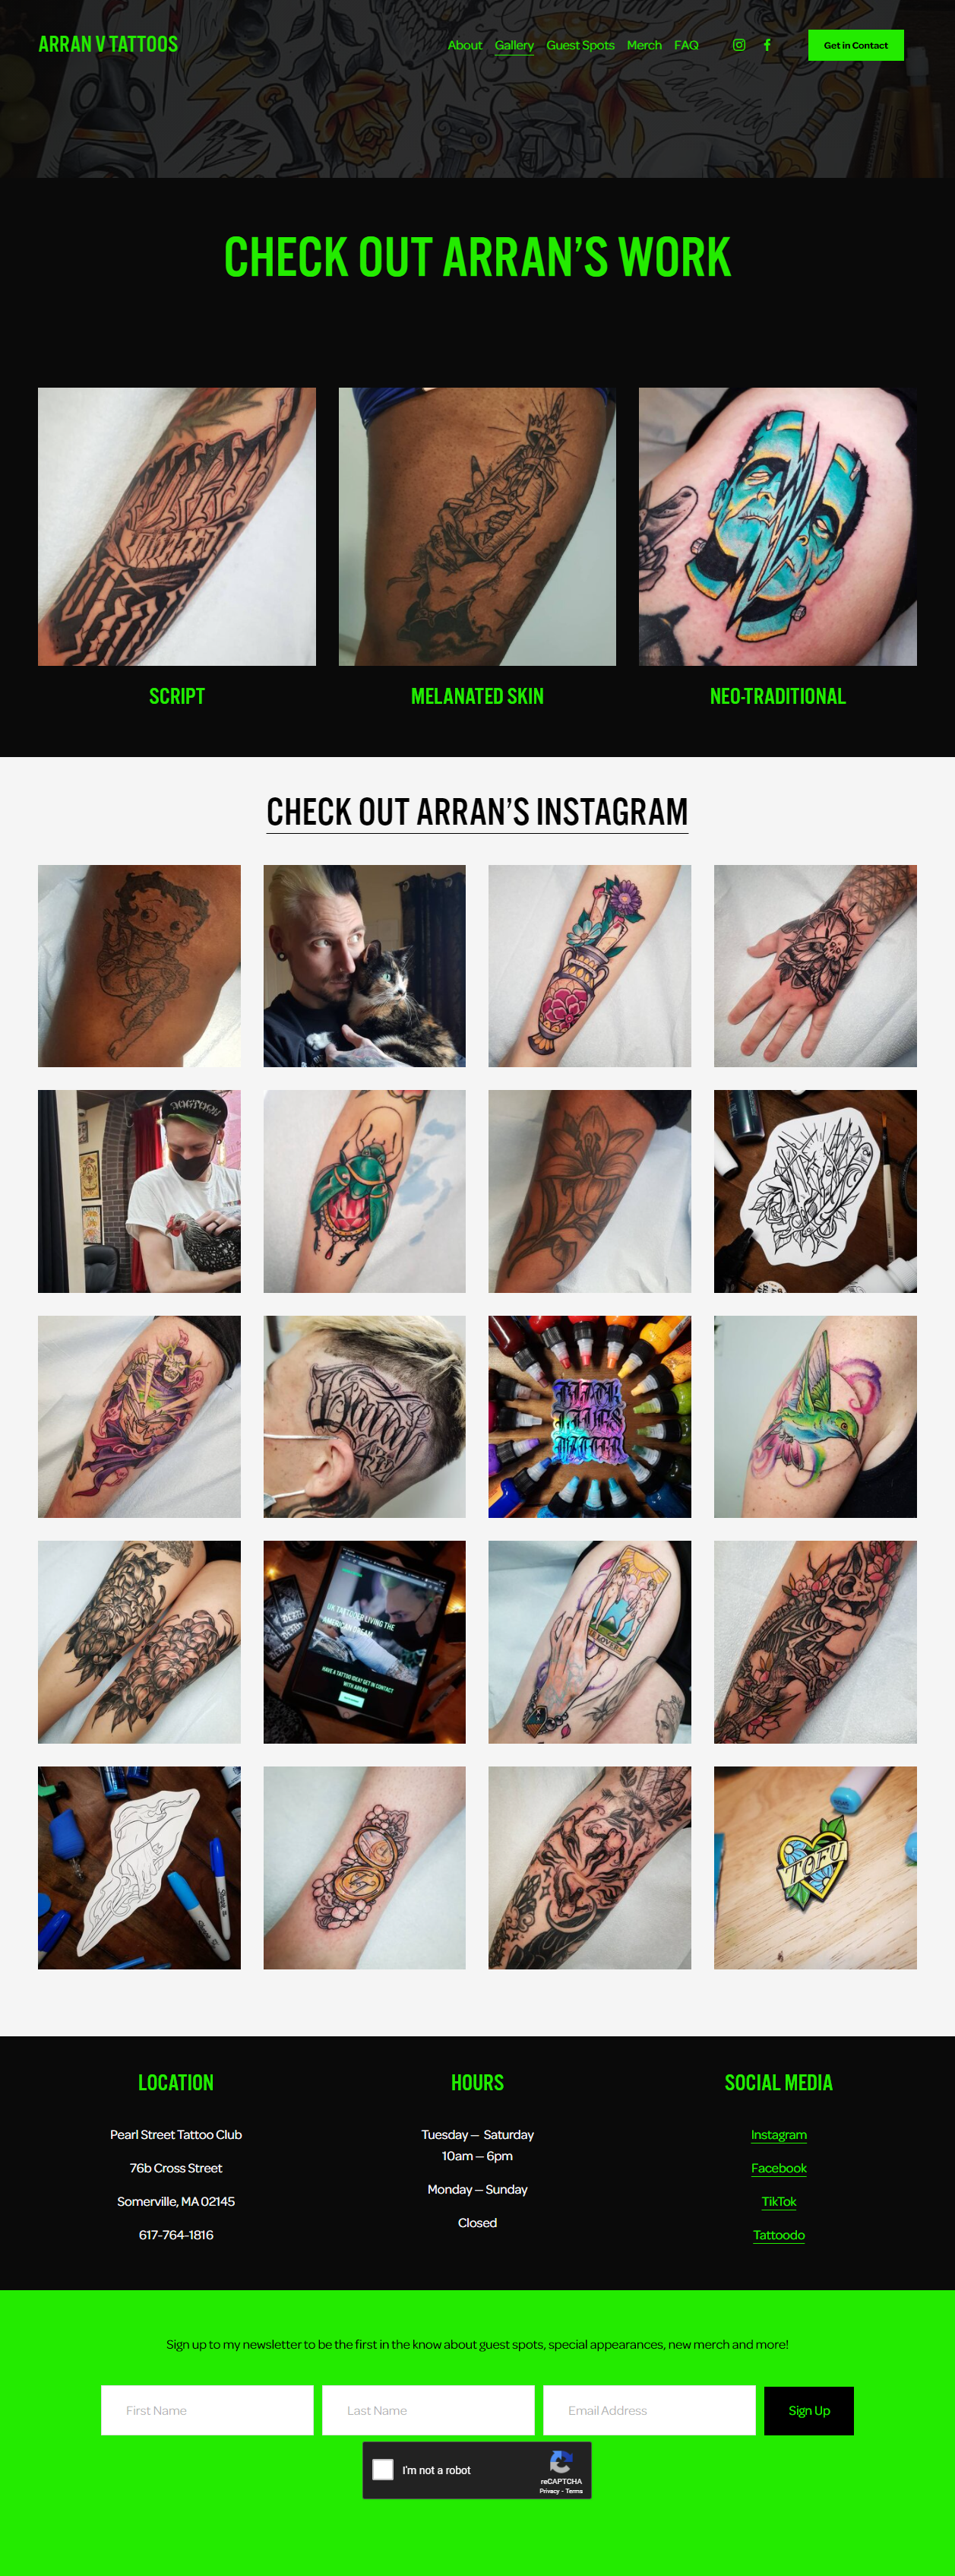 Image of of Arran V Tattoos Gallary page